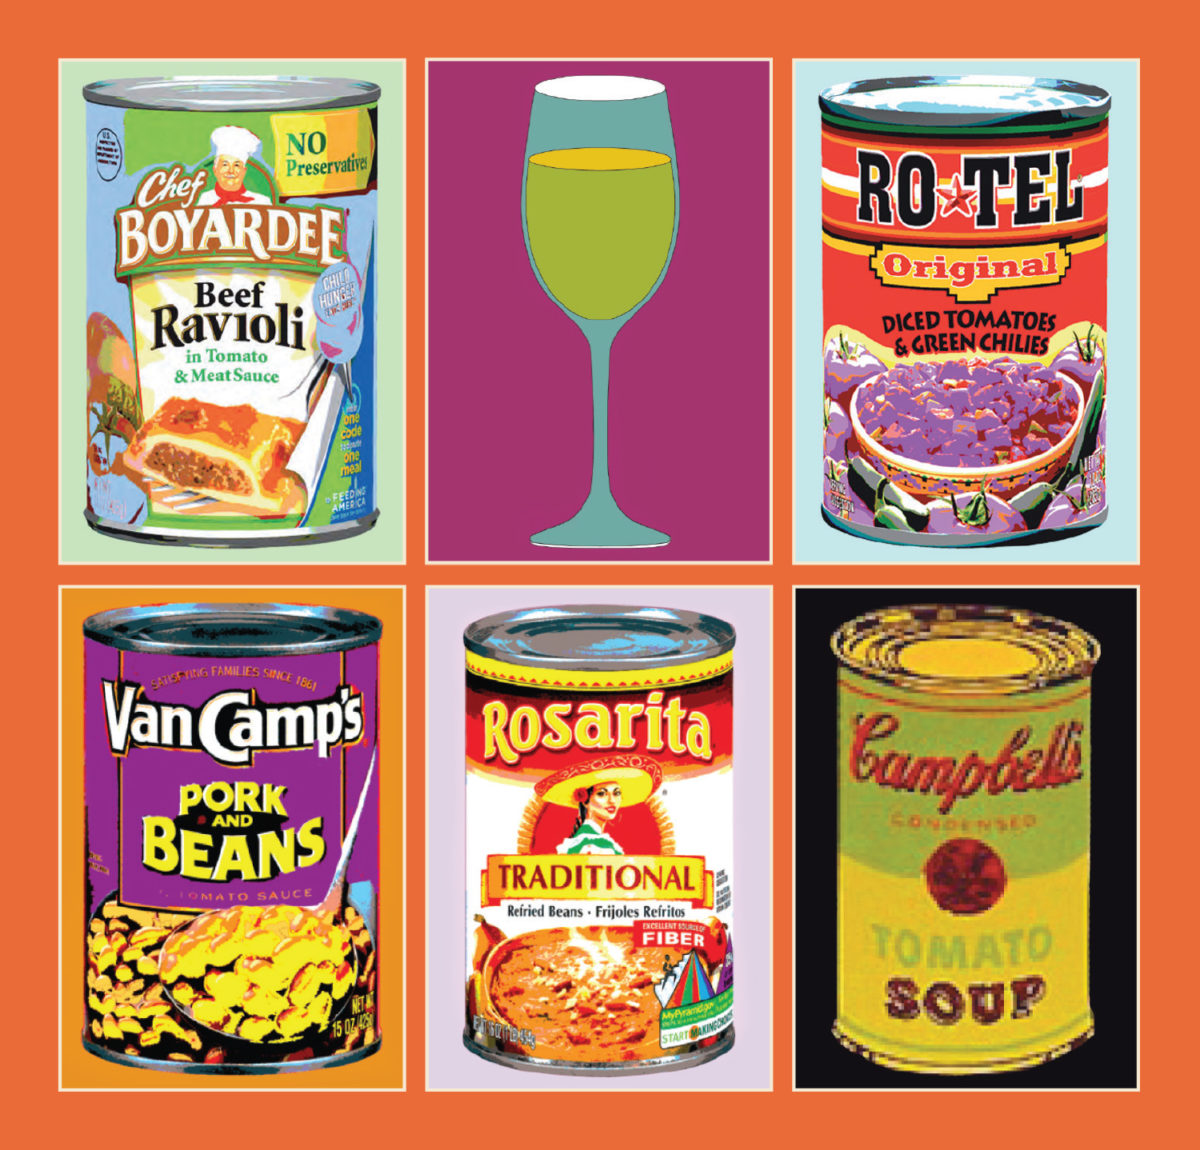 Andy Warhol-inspired design of canned food and a wine glass